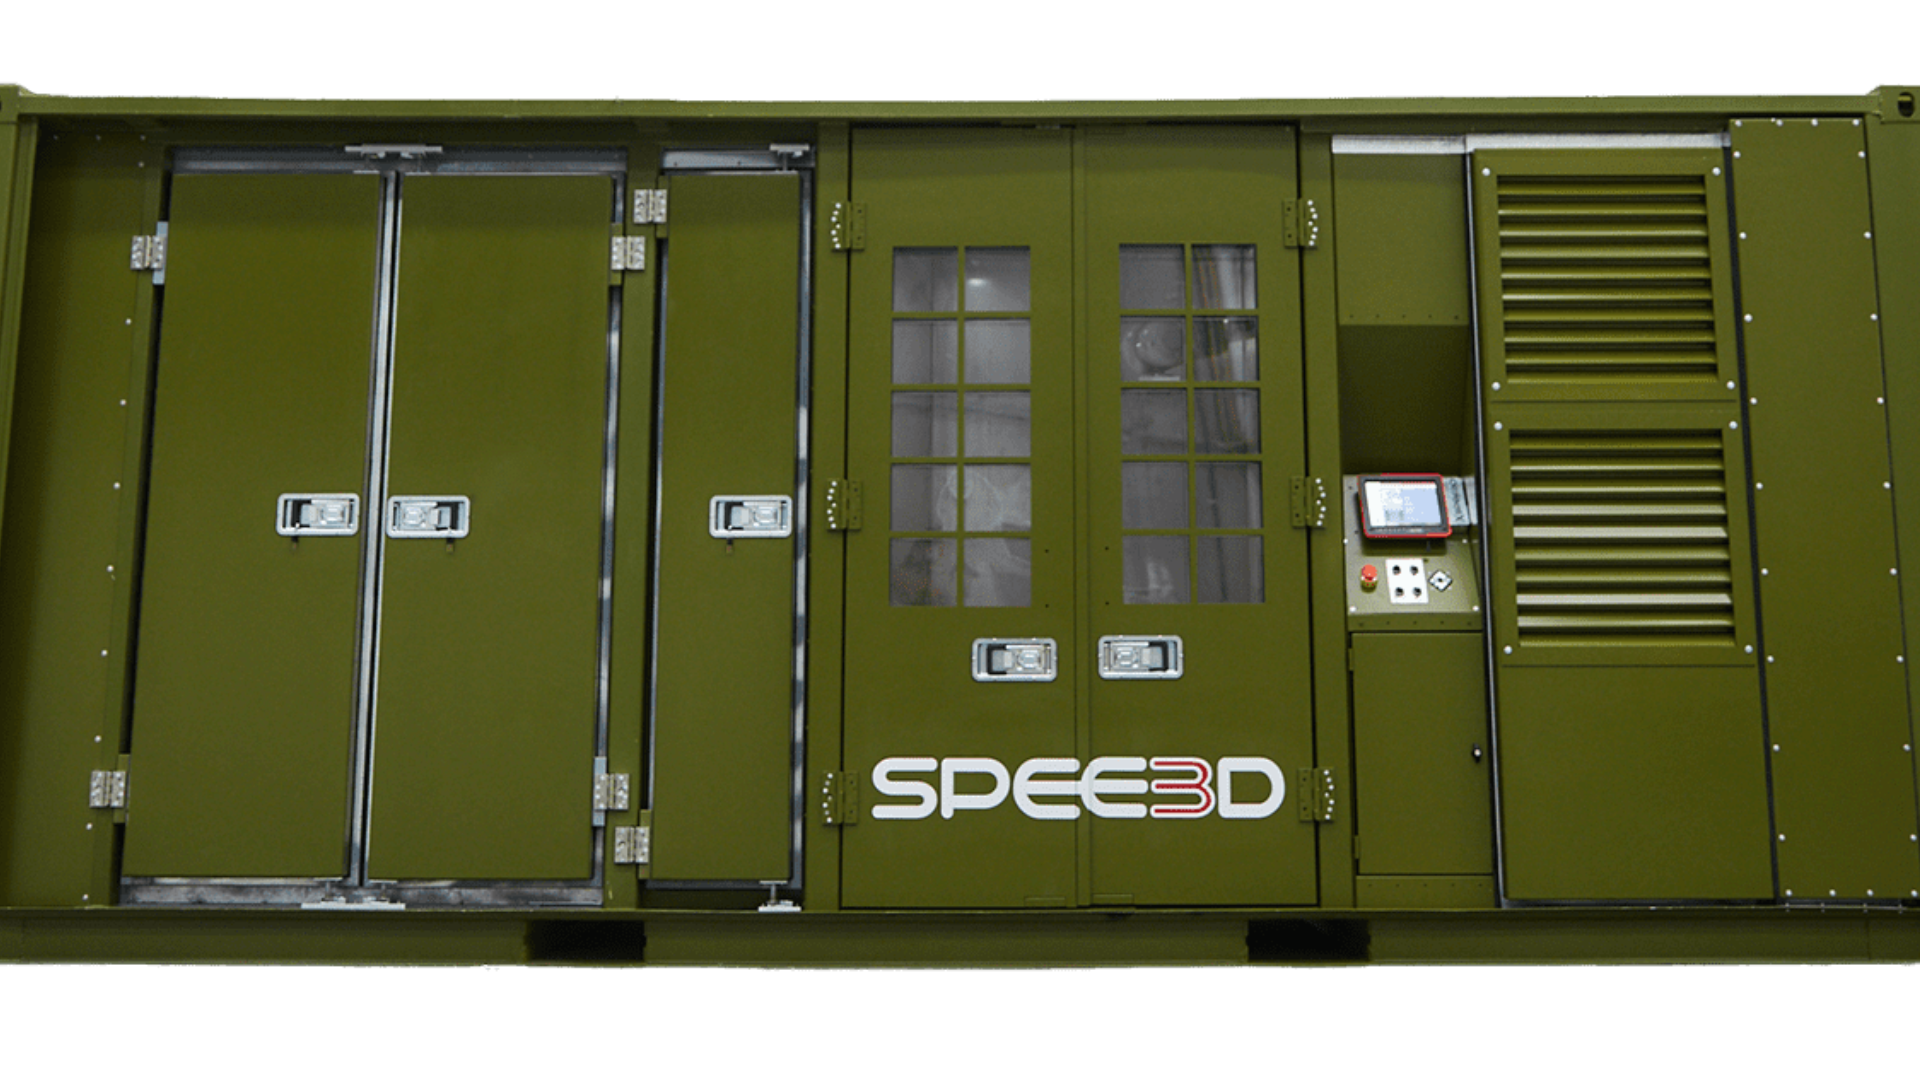 SPEE3D unveiled its XSPEE3D printer – a containerized, ruggedized, and deployable cold-spray metal 3D printer based on field work with the Australian Army